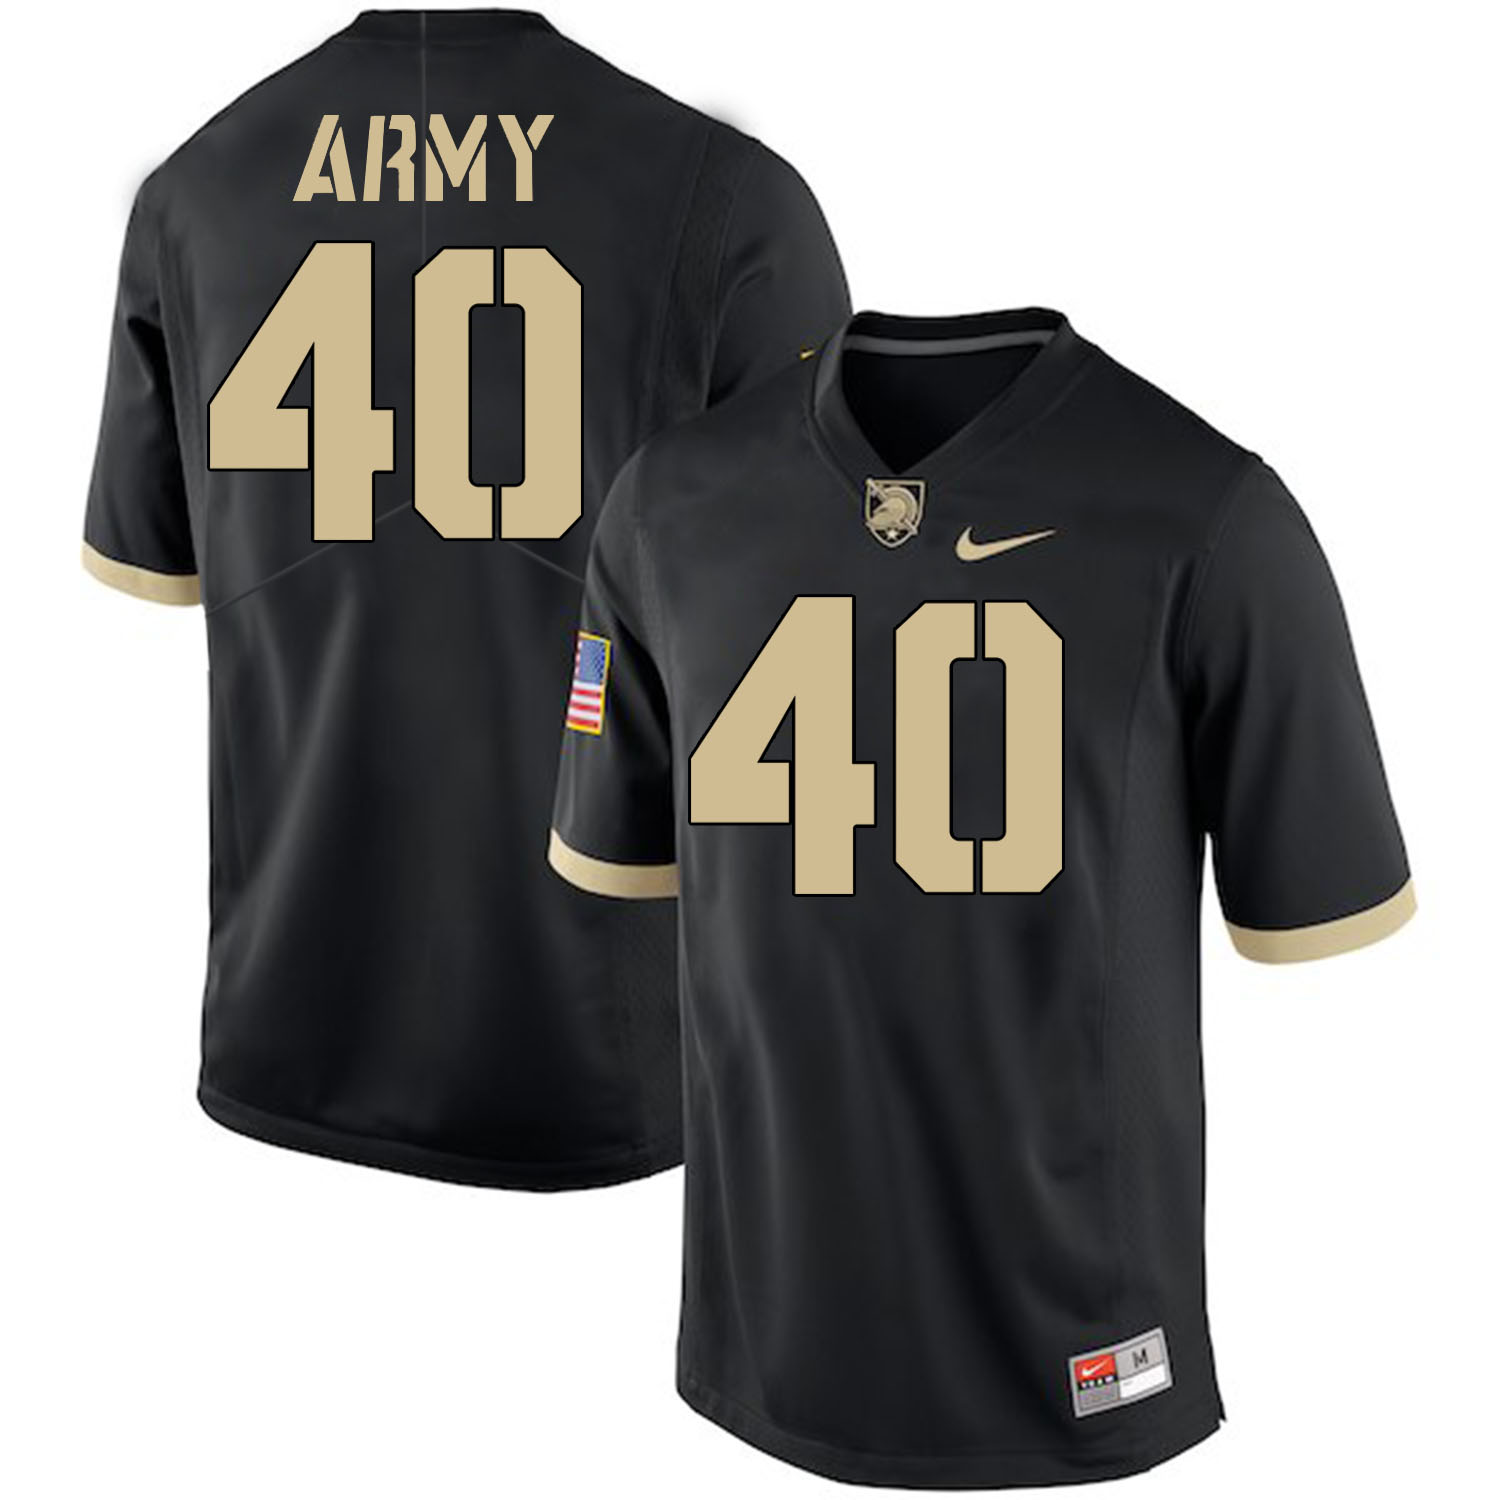 Army Black Knights 40 Andy Davidson Black College Football Jersey